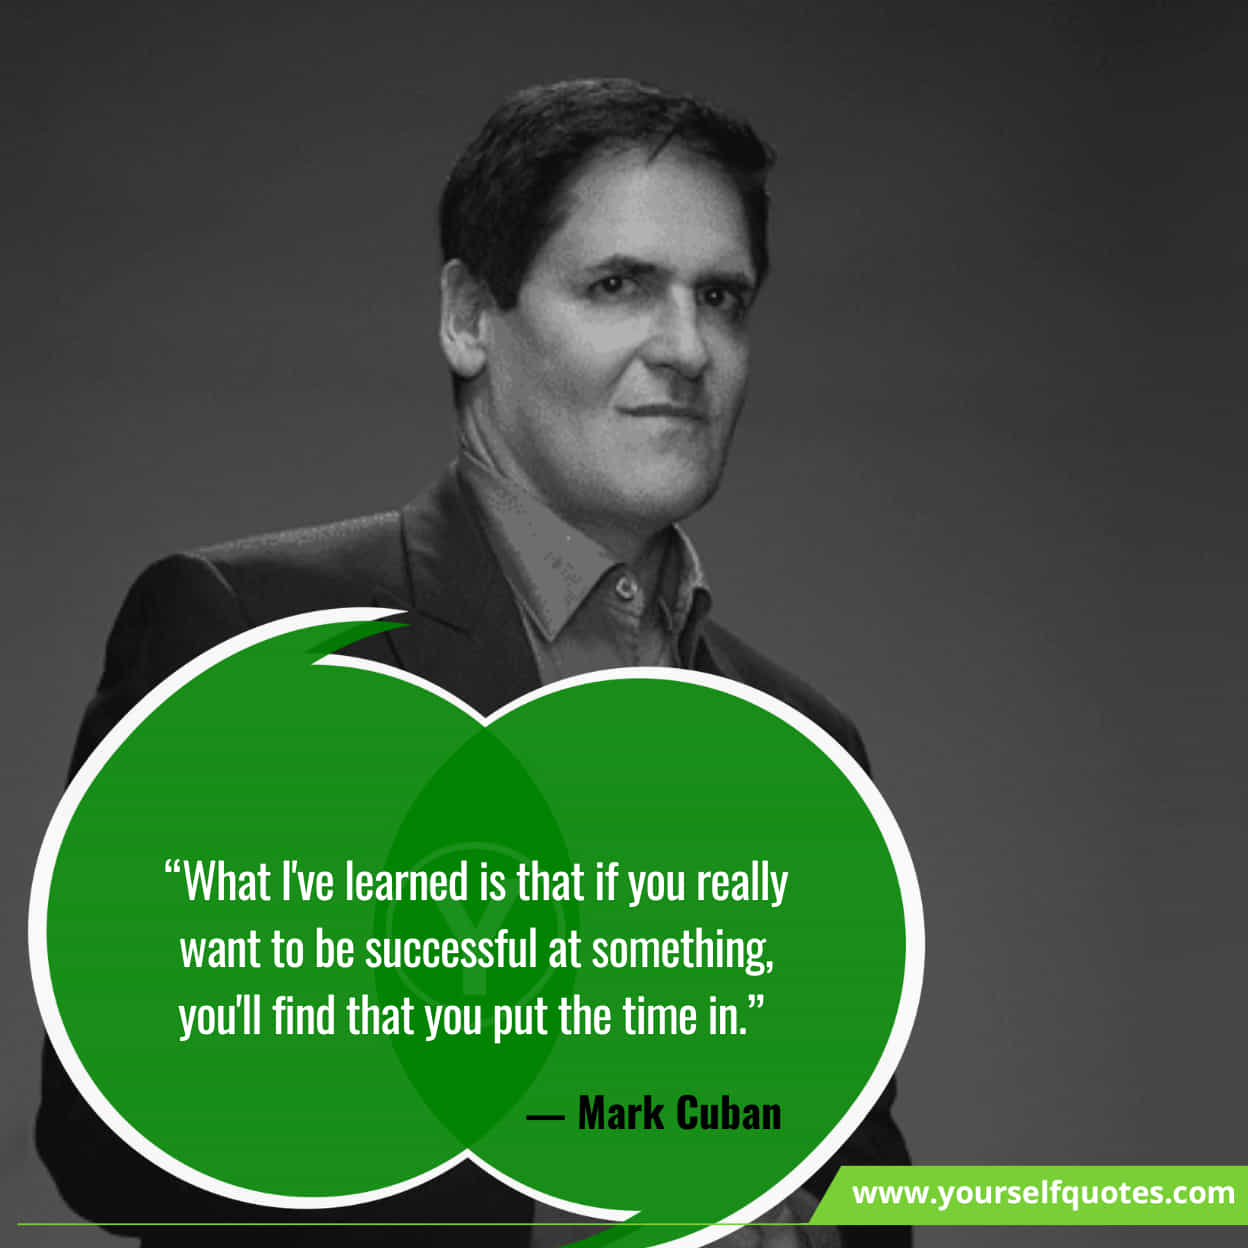 Quotes about hard work and determination by Mark Cuban